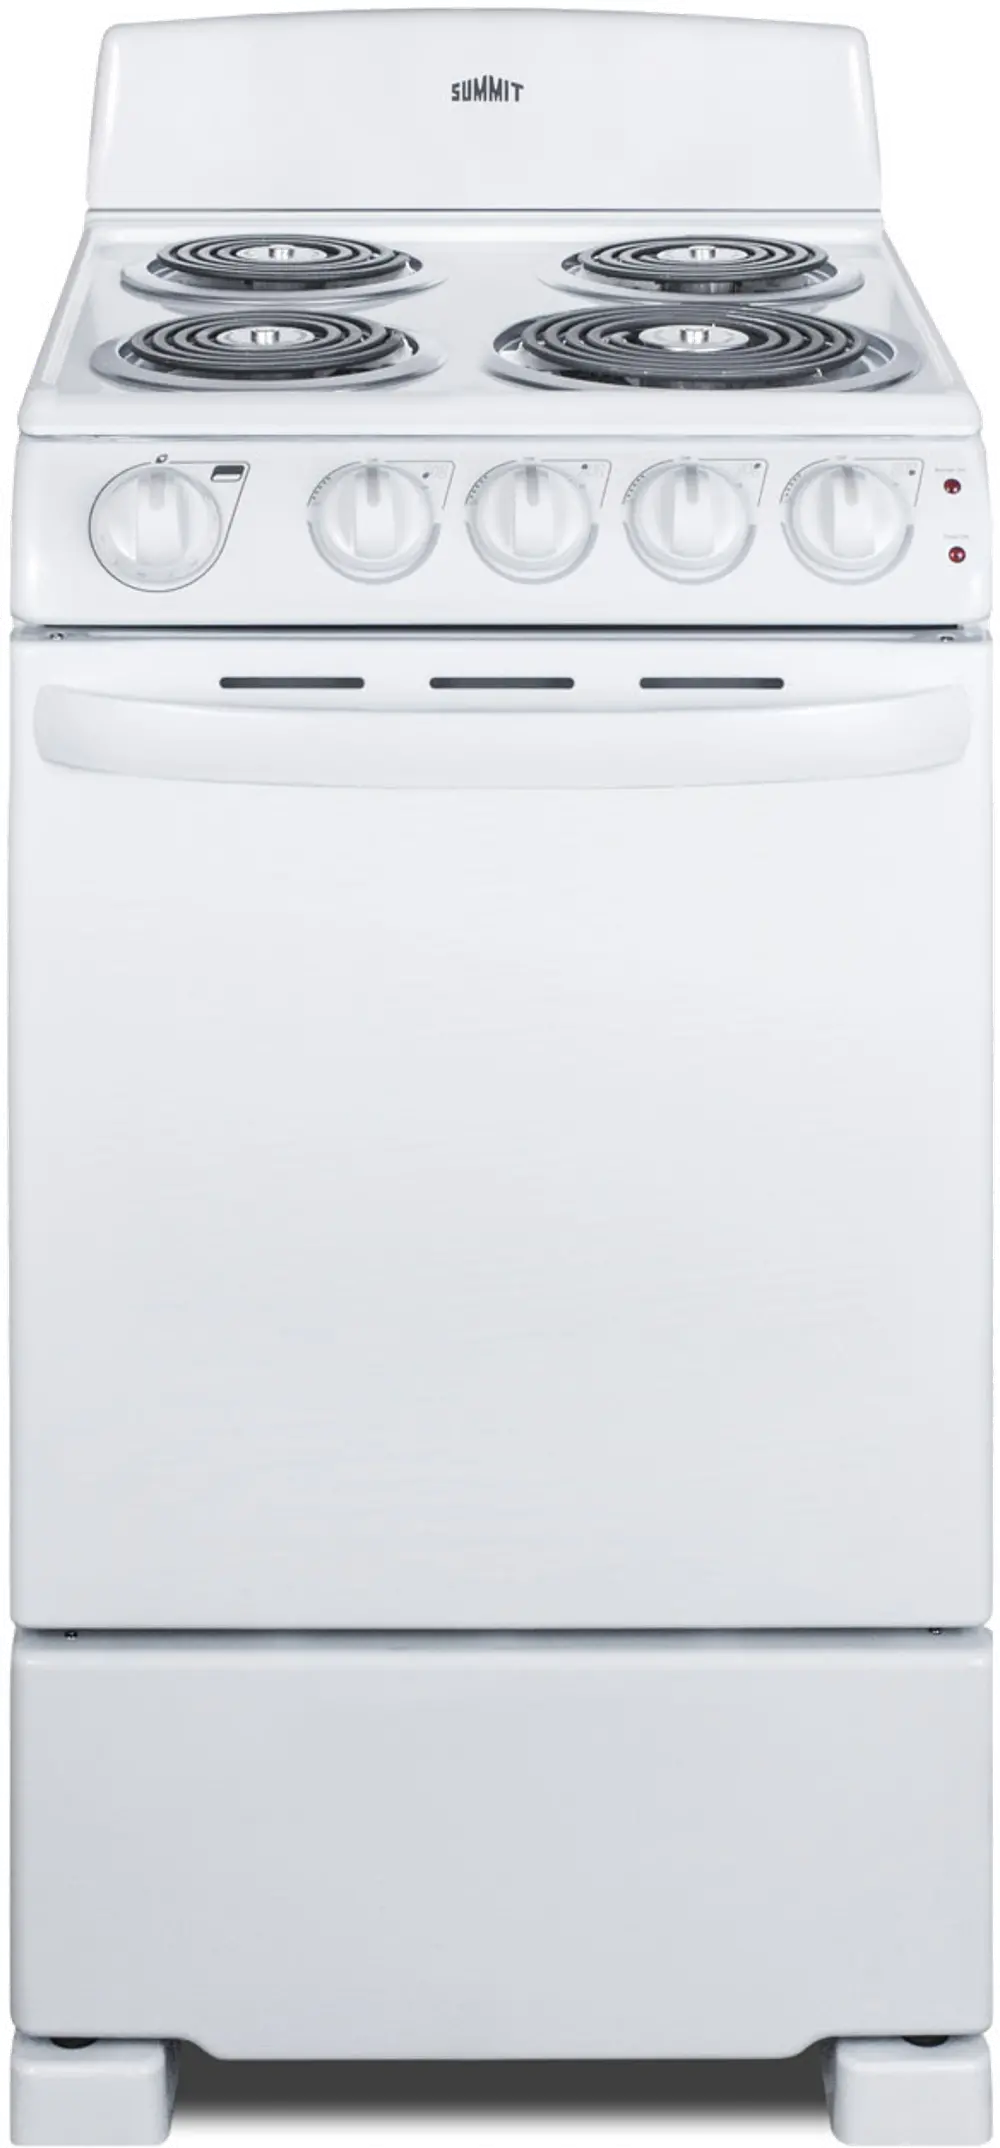 Summit 2.3 cu ft Electric Coil Range - White 20 Inch-1